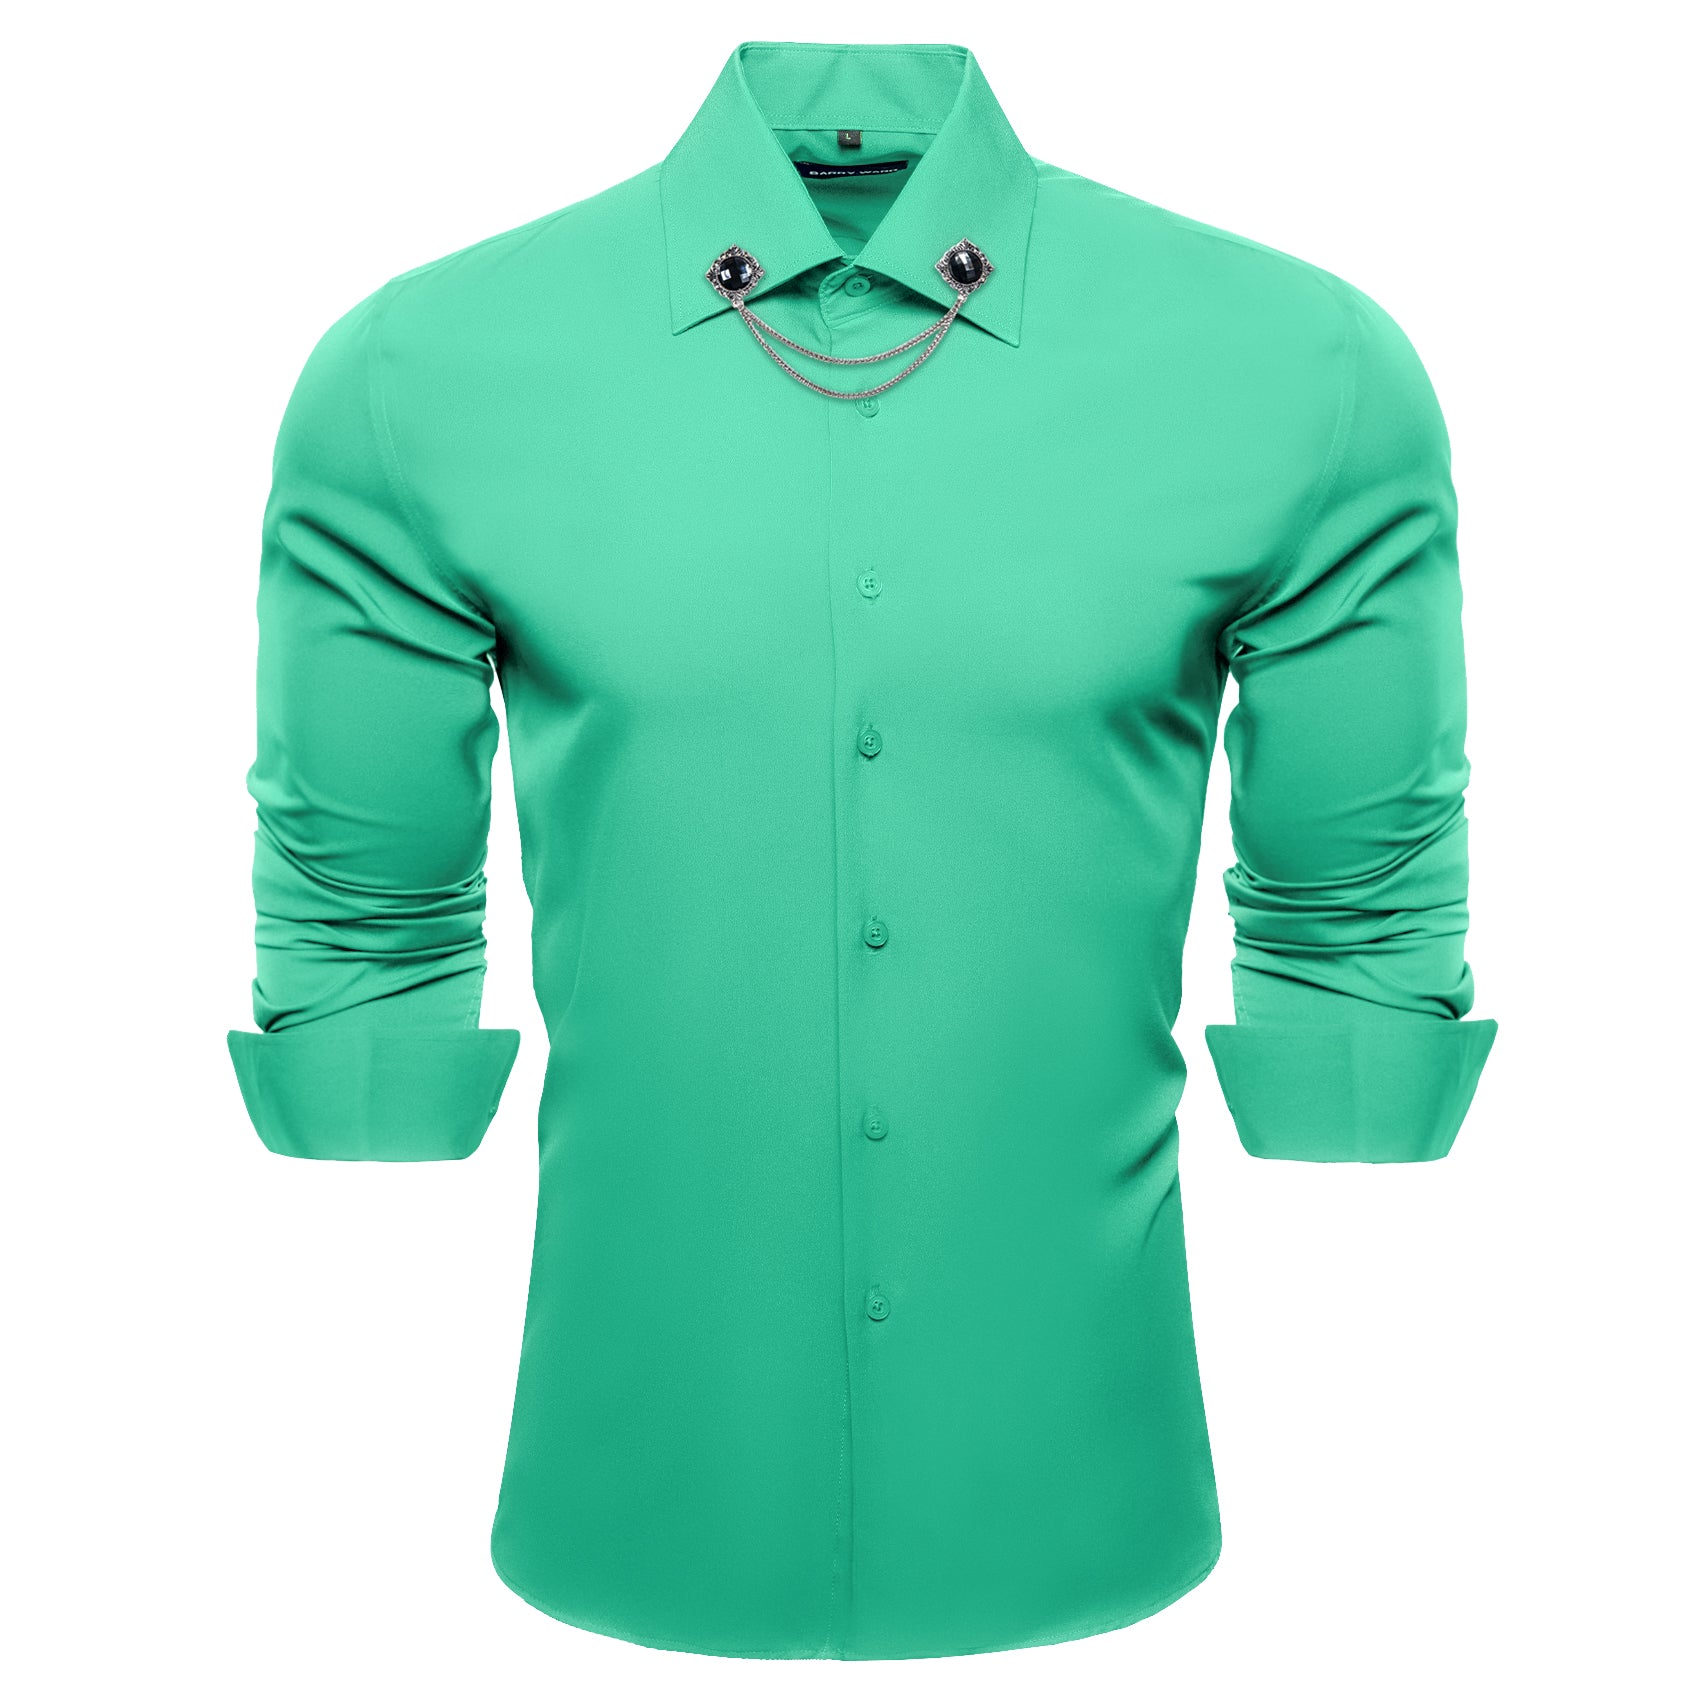 Barry.wang Pale Green Solid Silk Shirt with Collar Pin